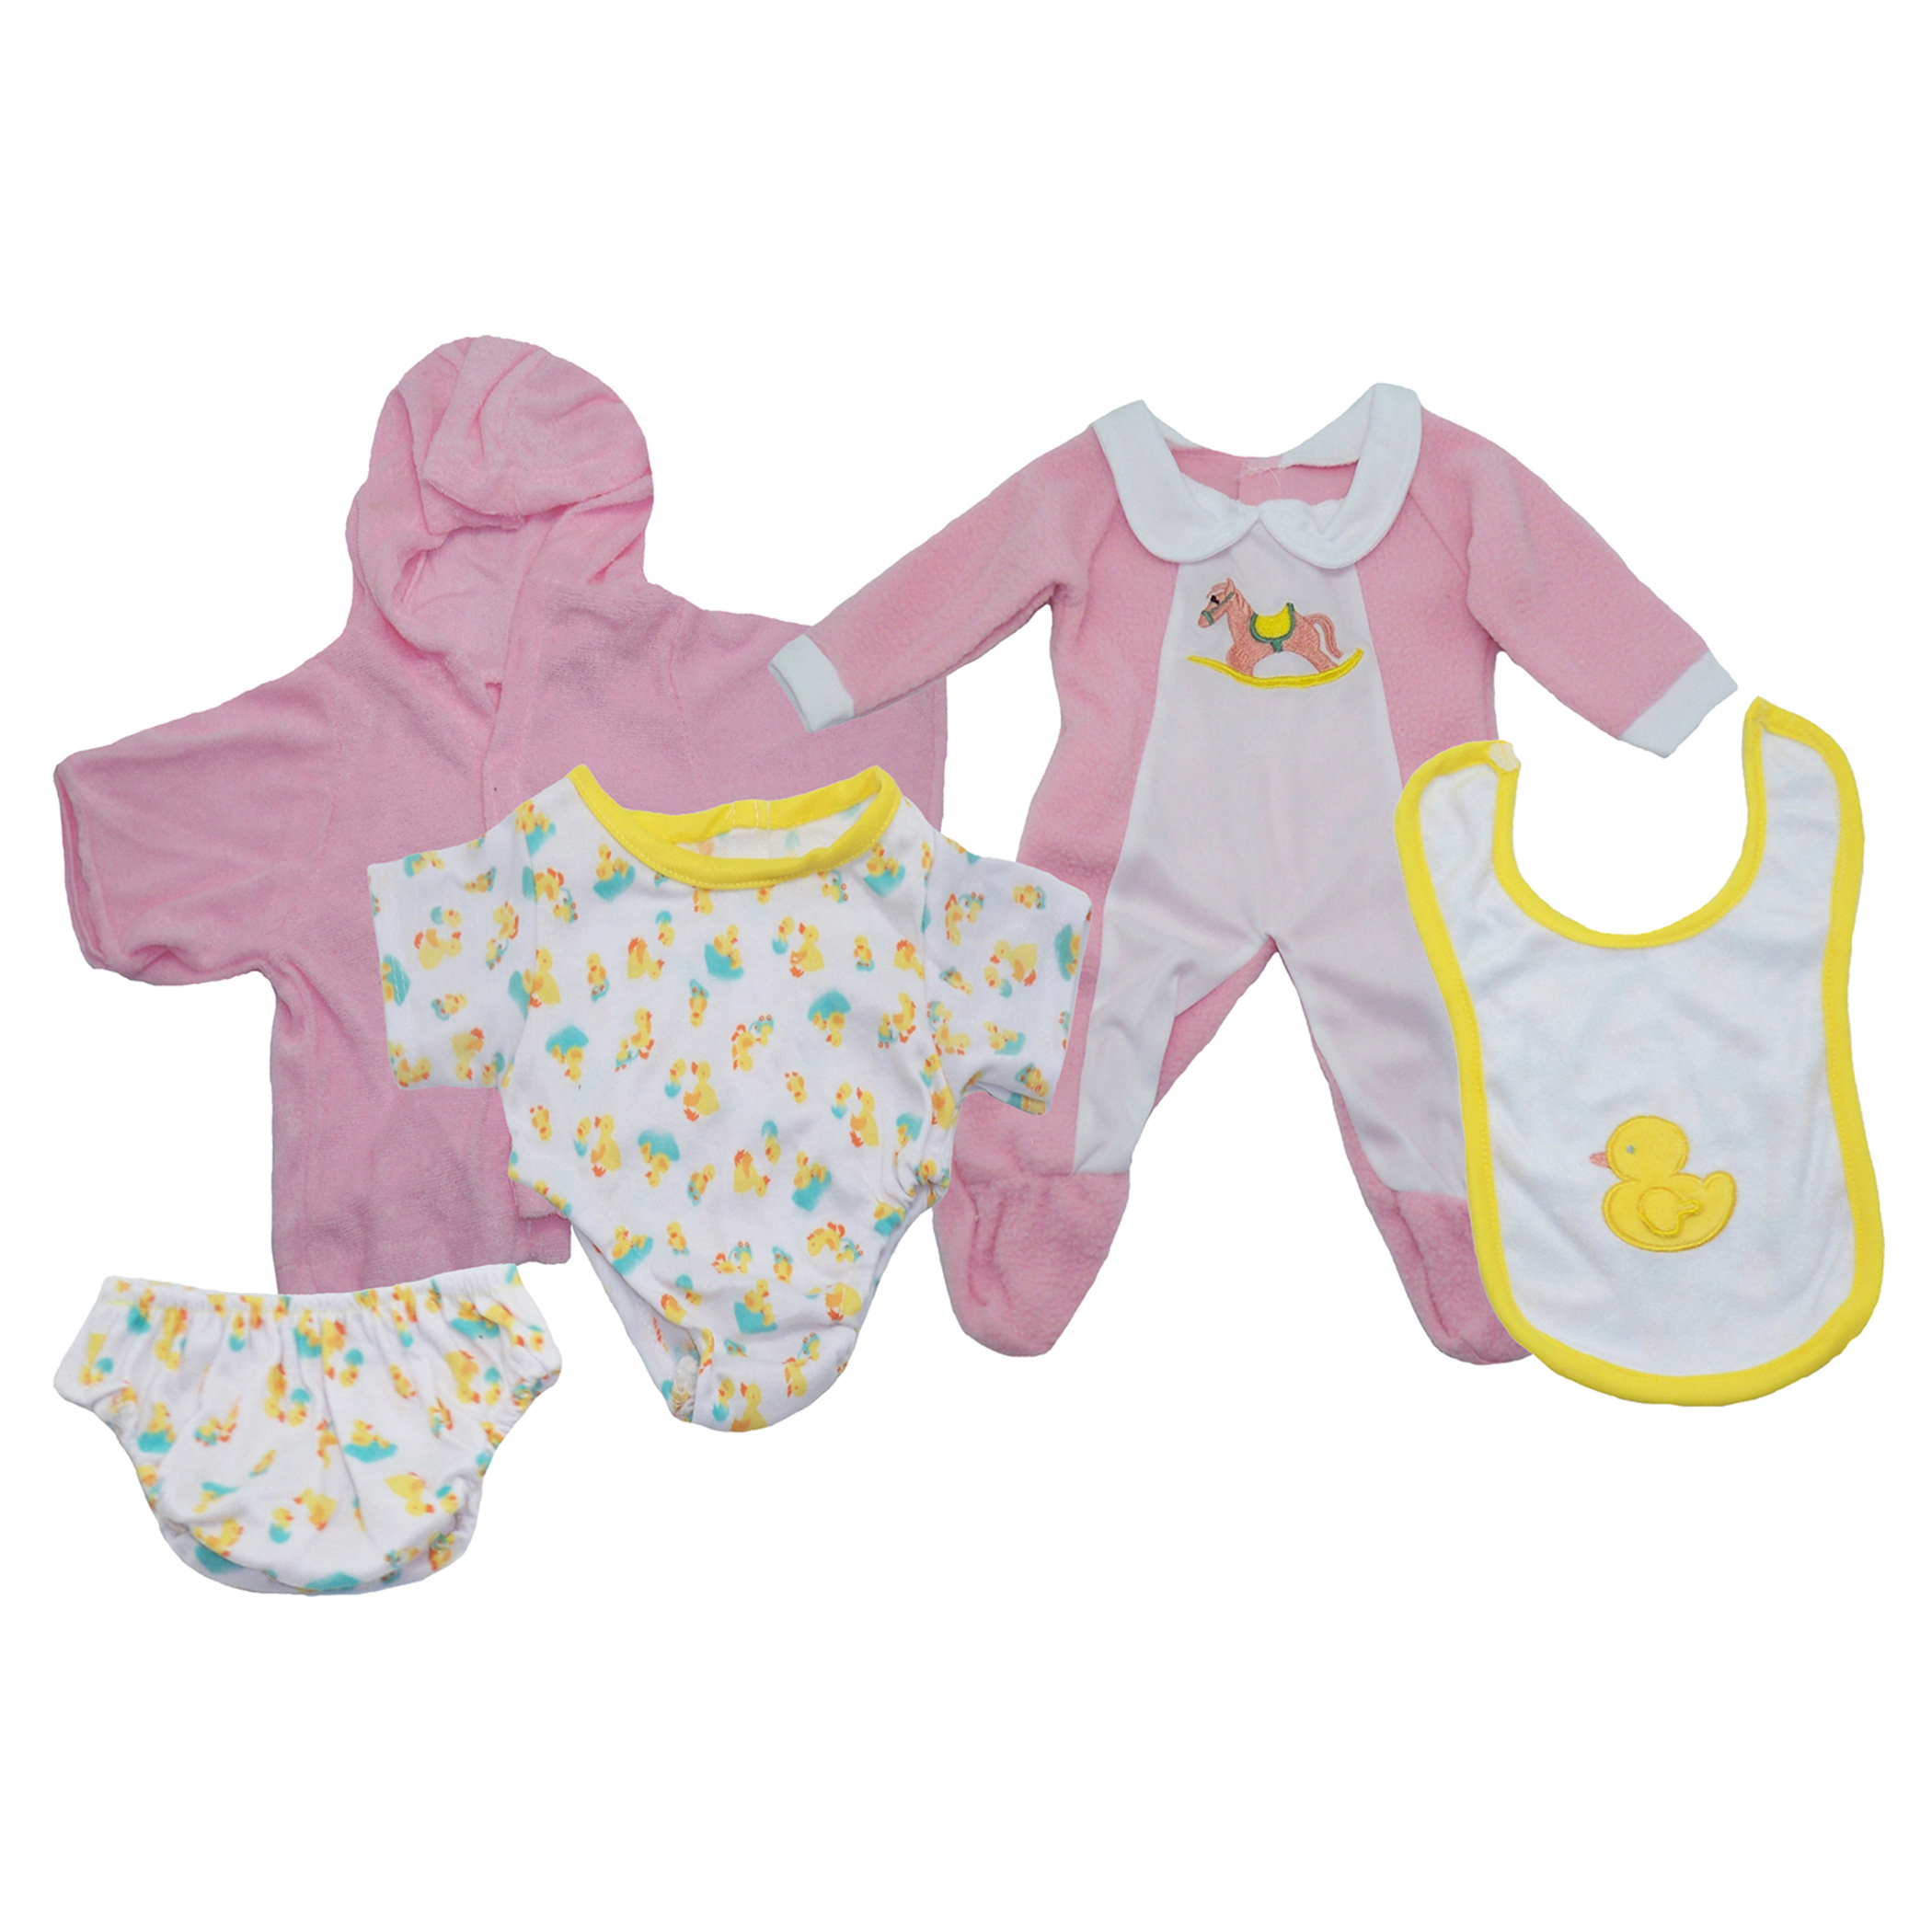 Get Ready Kids Girl Doll Clothes Set, 3 Outfits